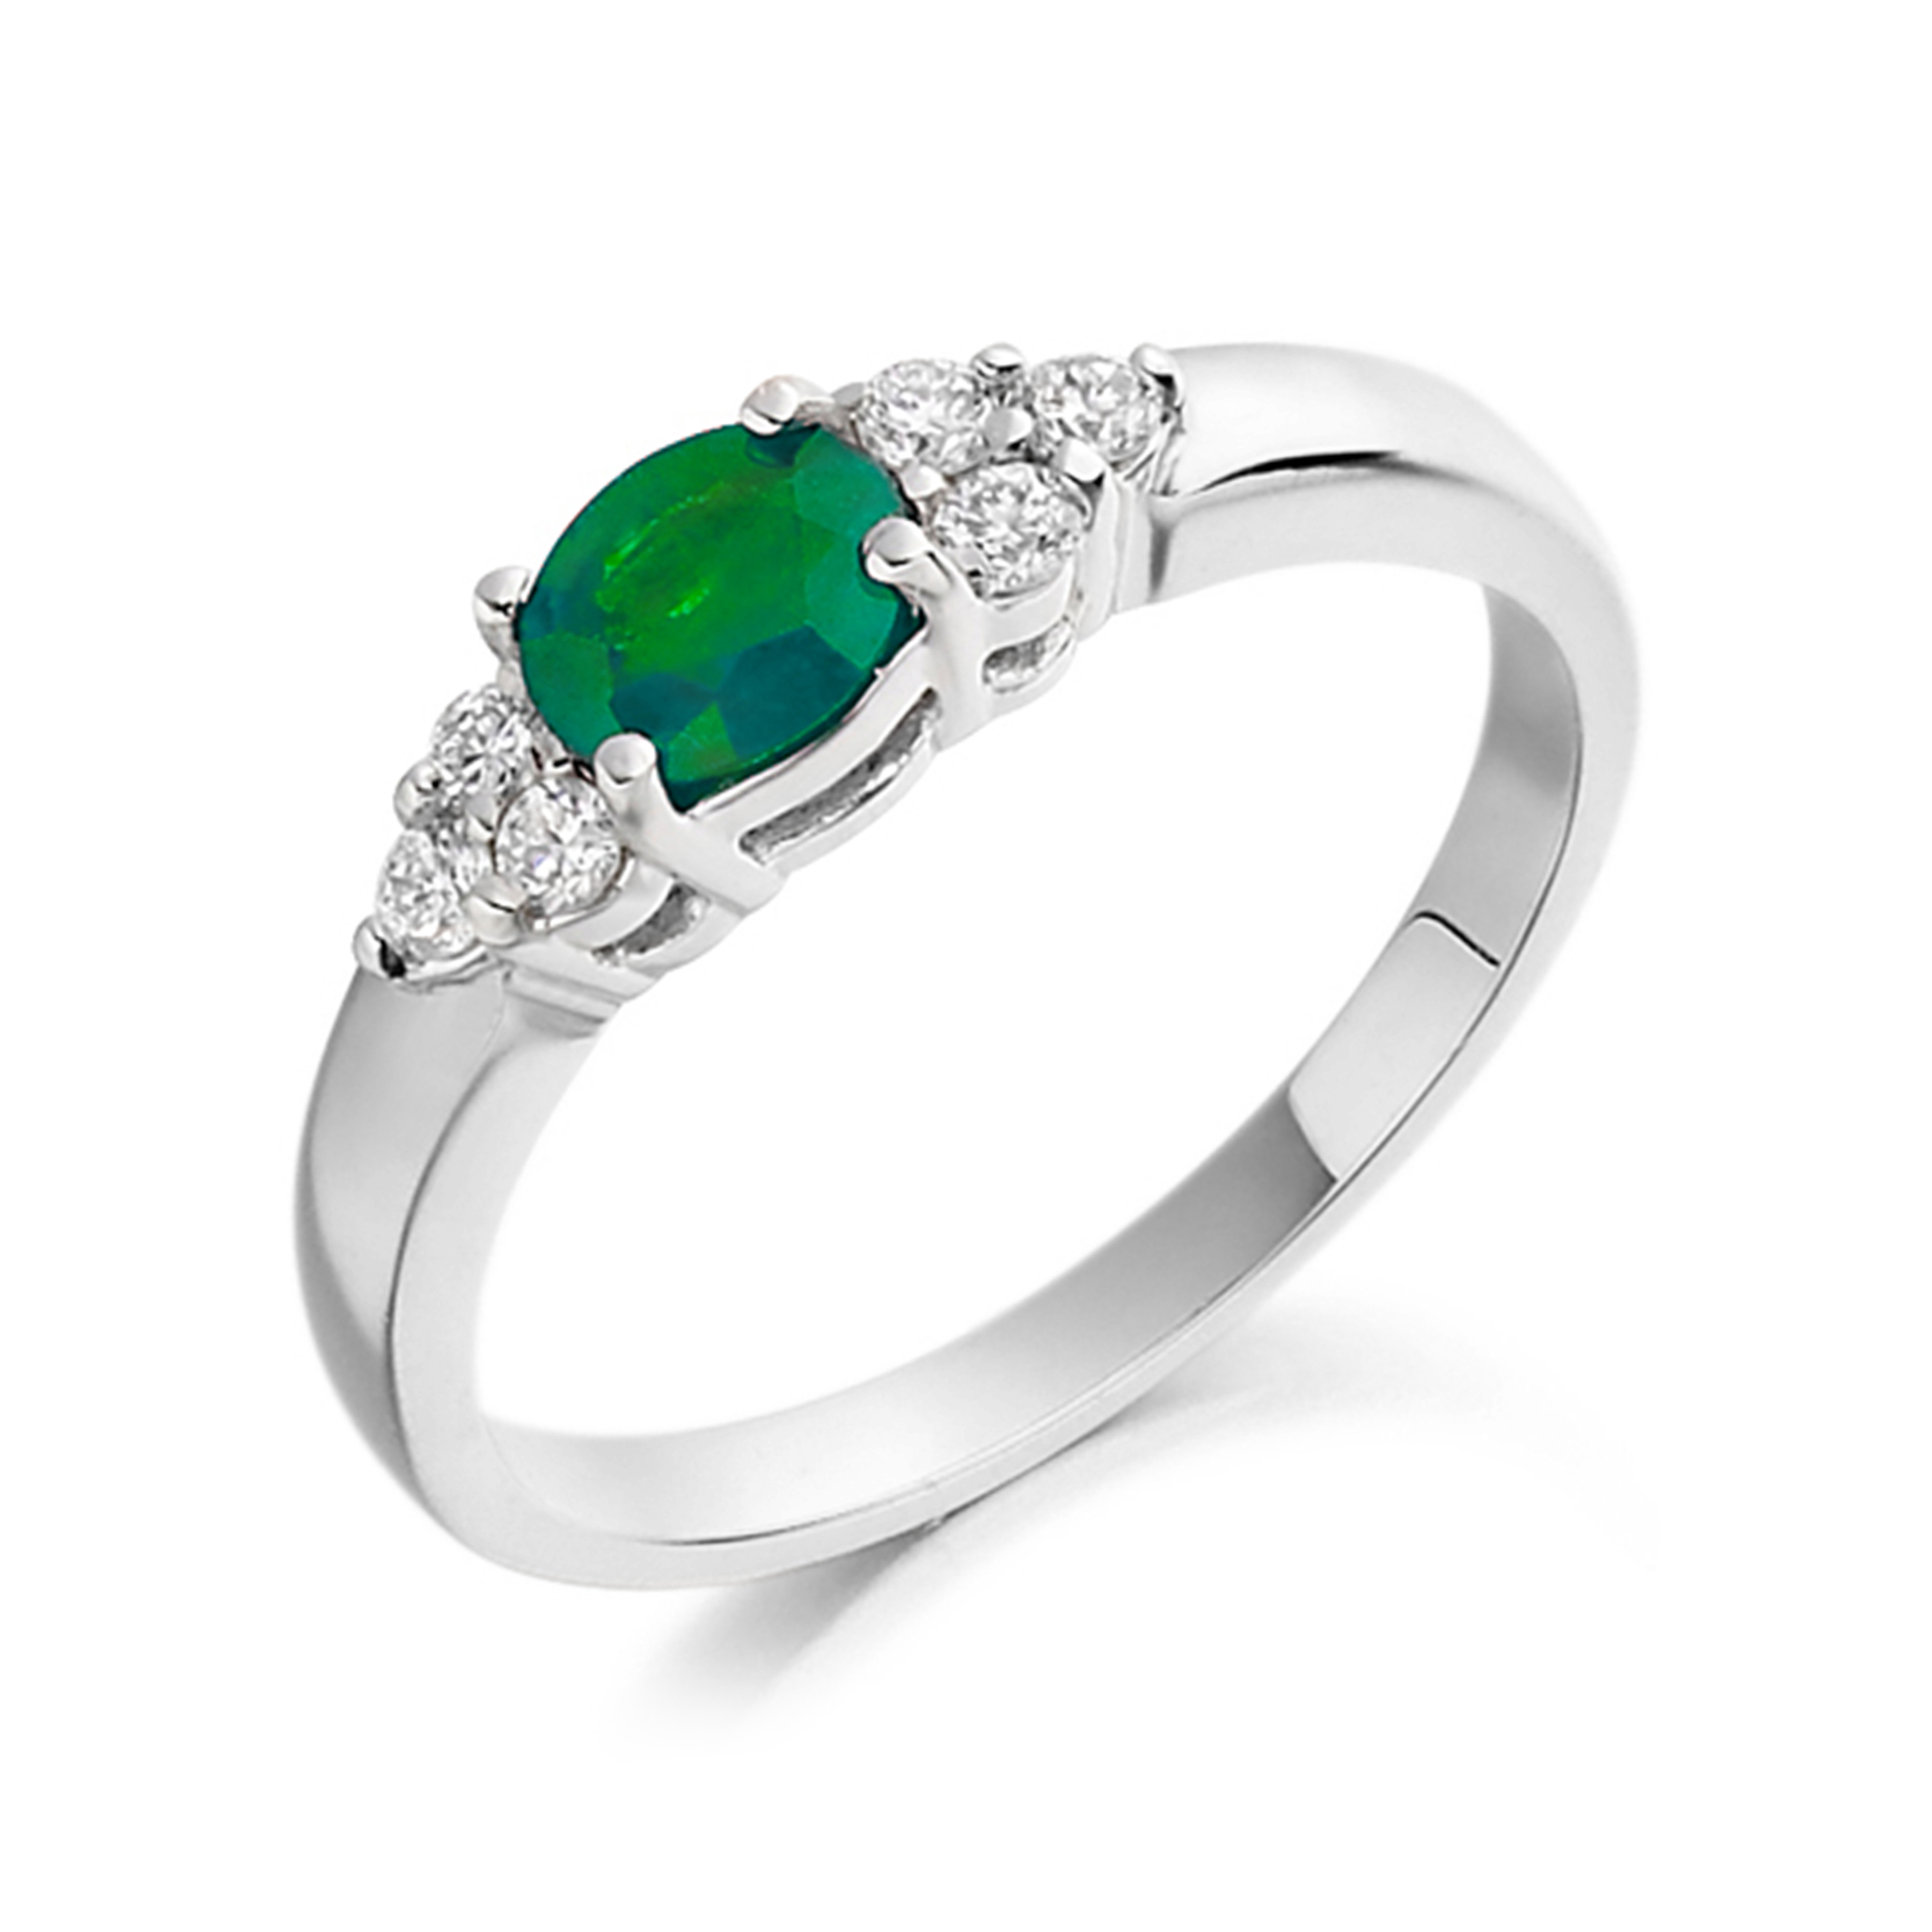 gemstone ring with oval shape emerald and side stone ring